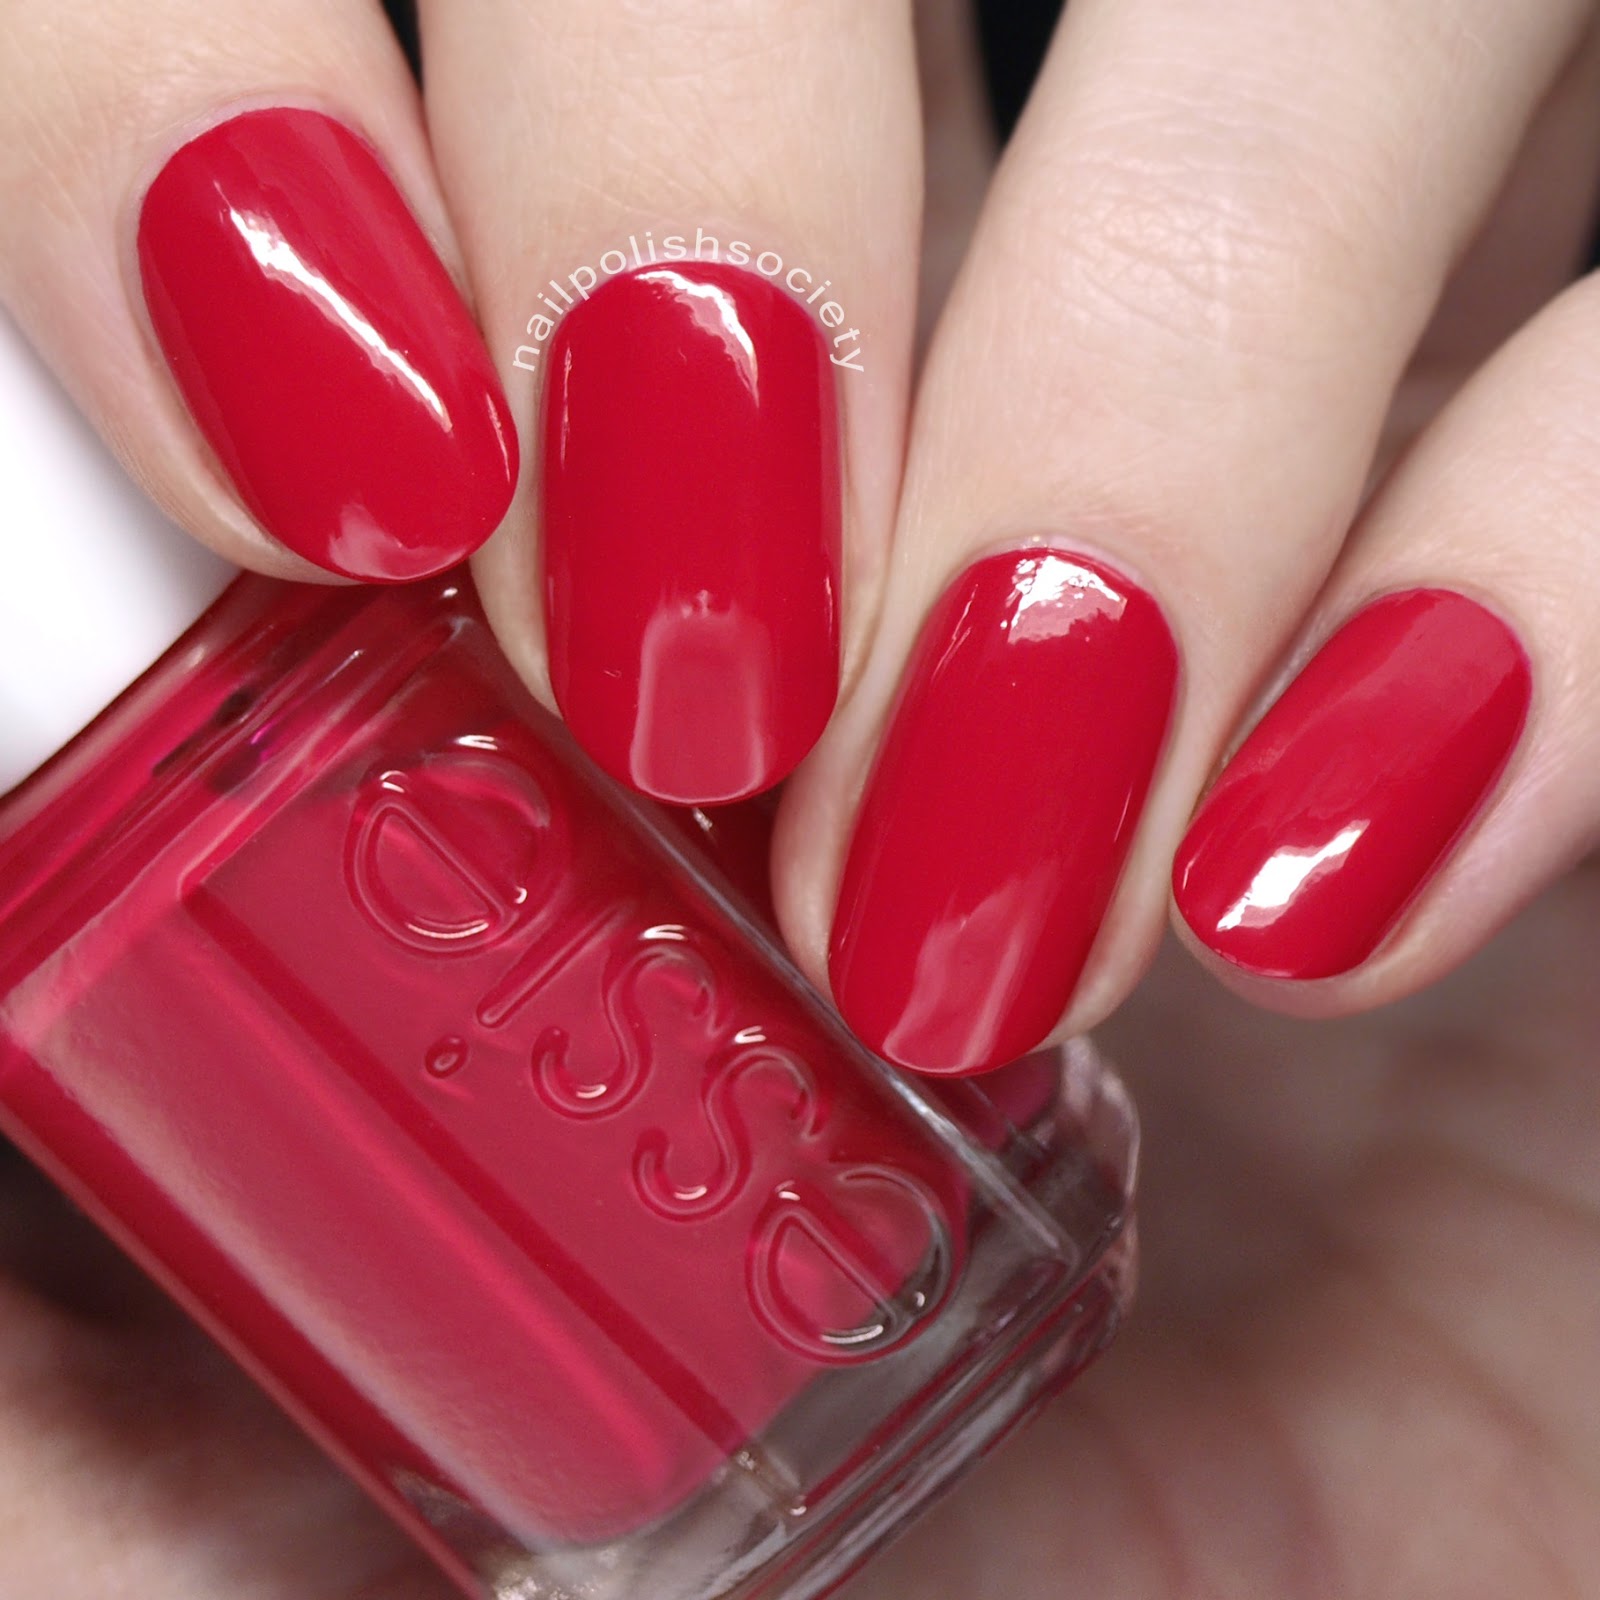 Nail Polish Society 14 Perfect Pink and Red Polishes for Valentine's Day